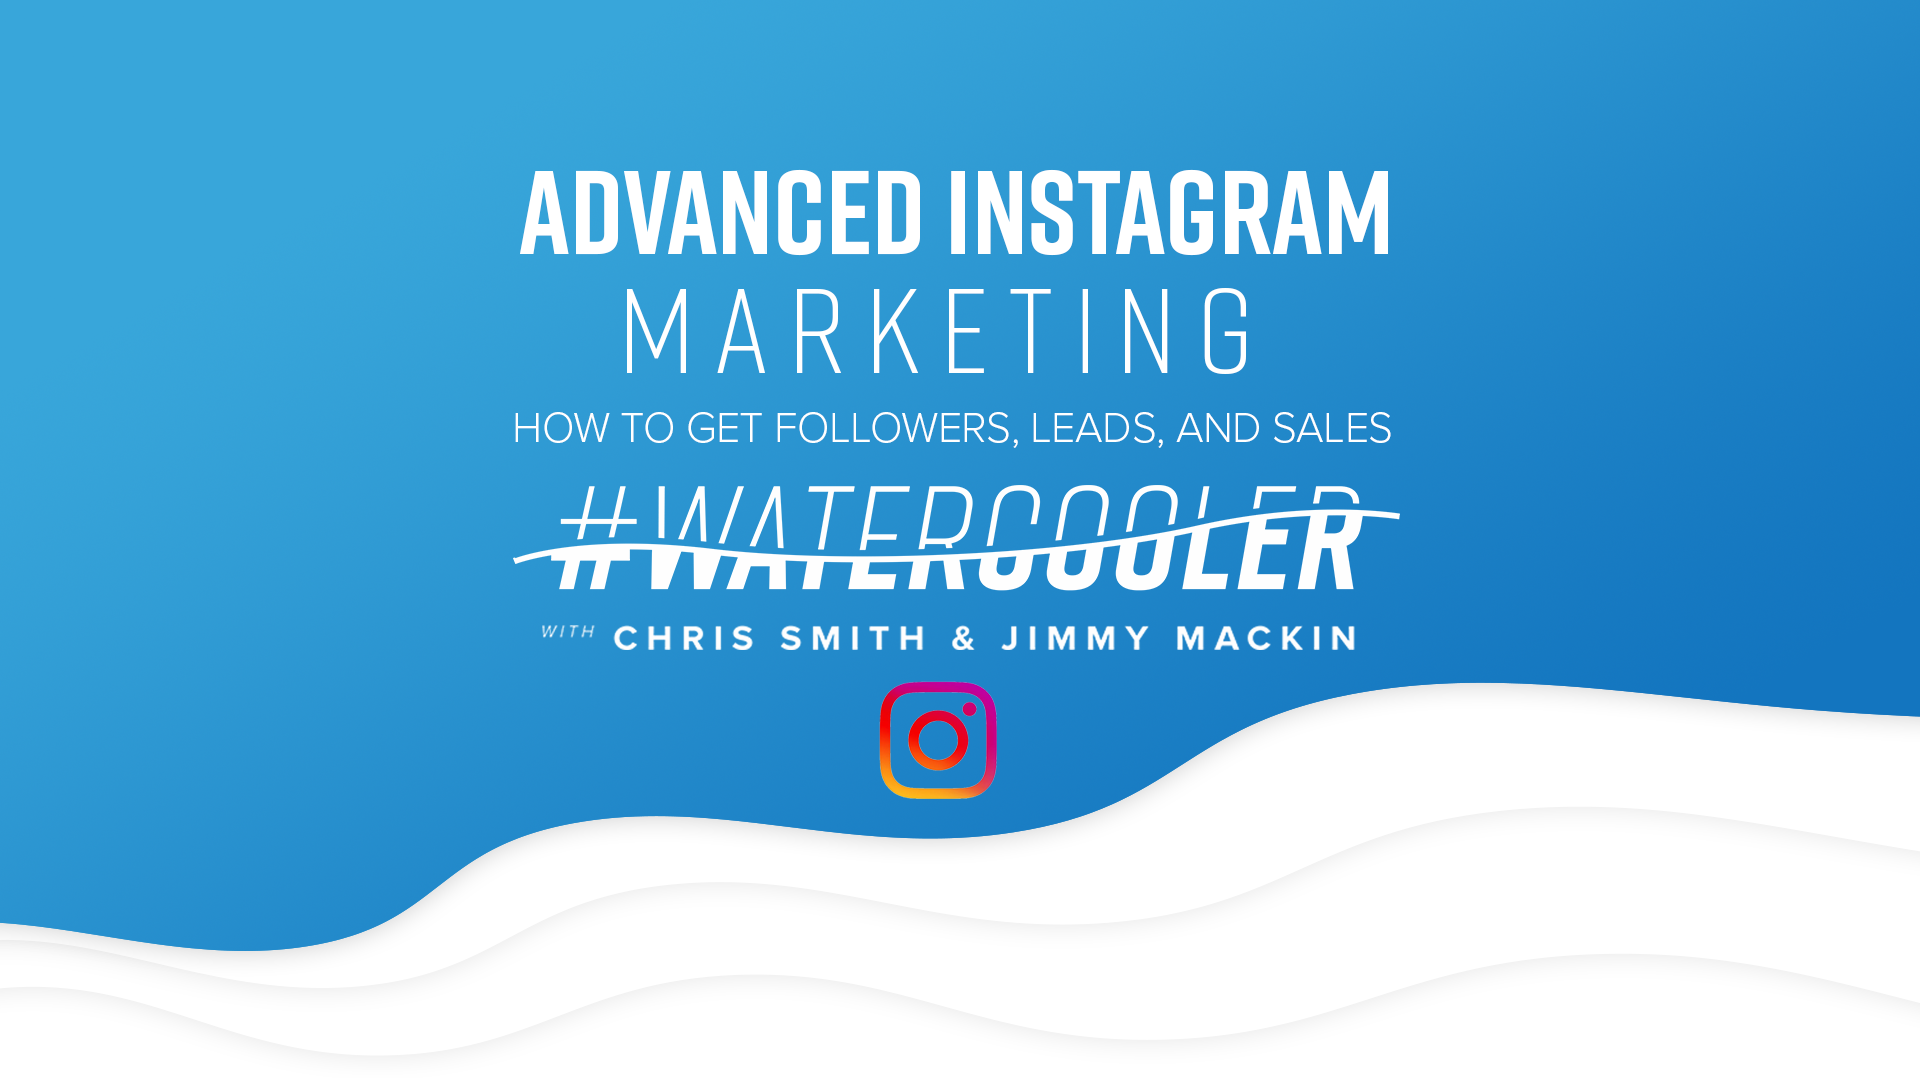 watercooler how to get followers leads and sales from instagram - how to get followers on instagram marketing